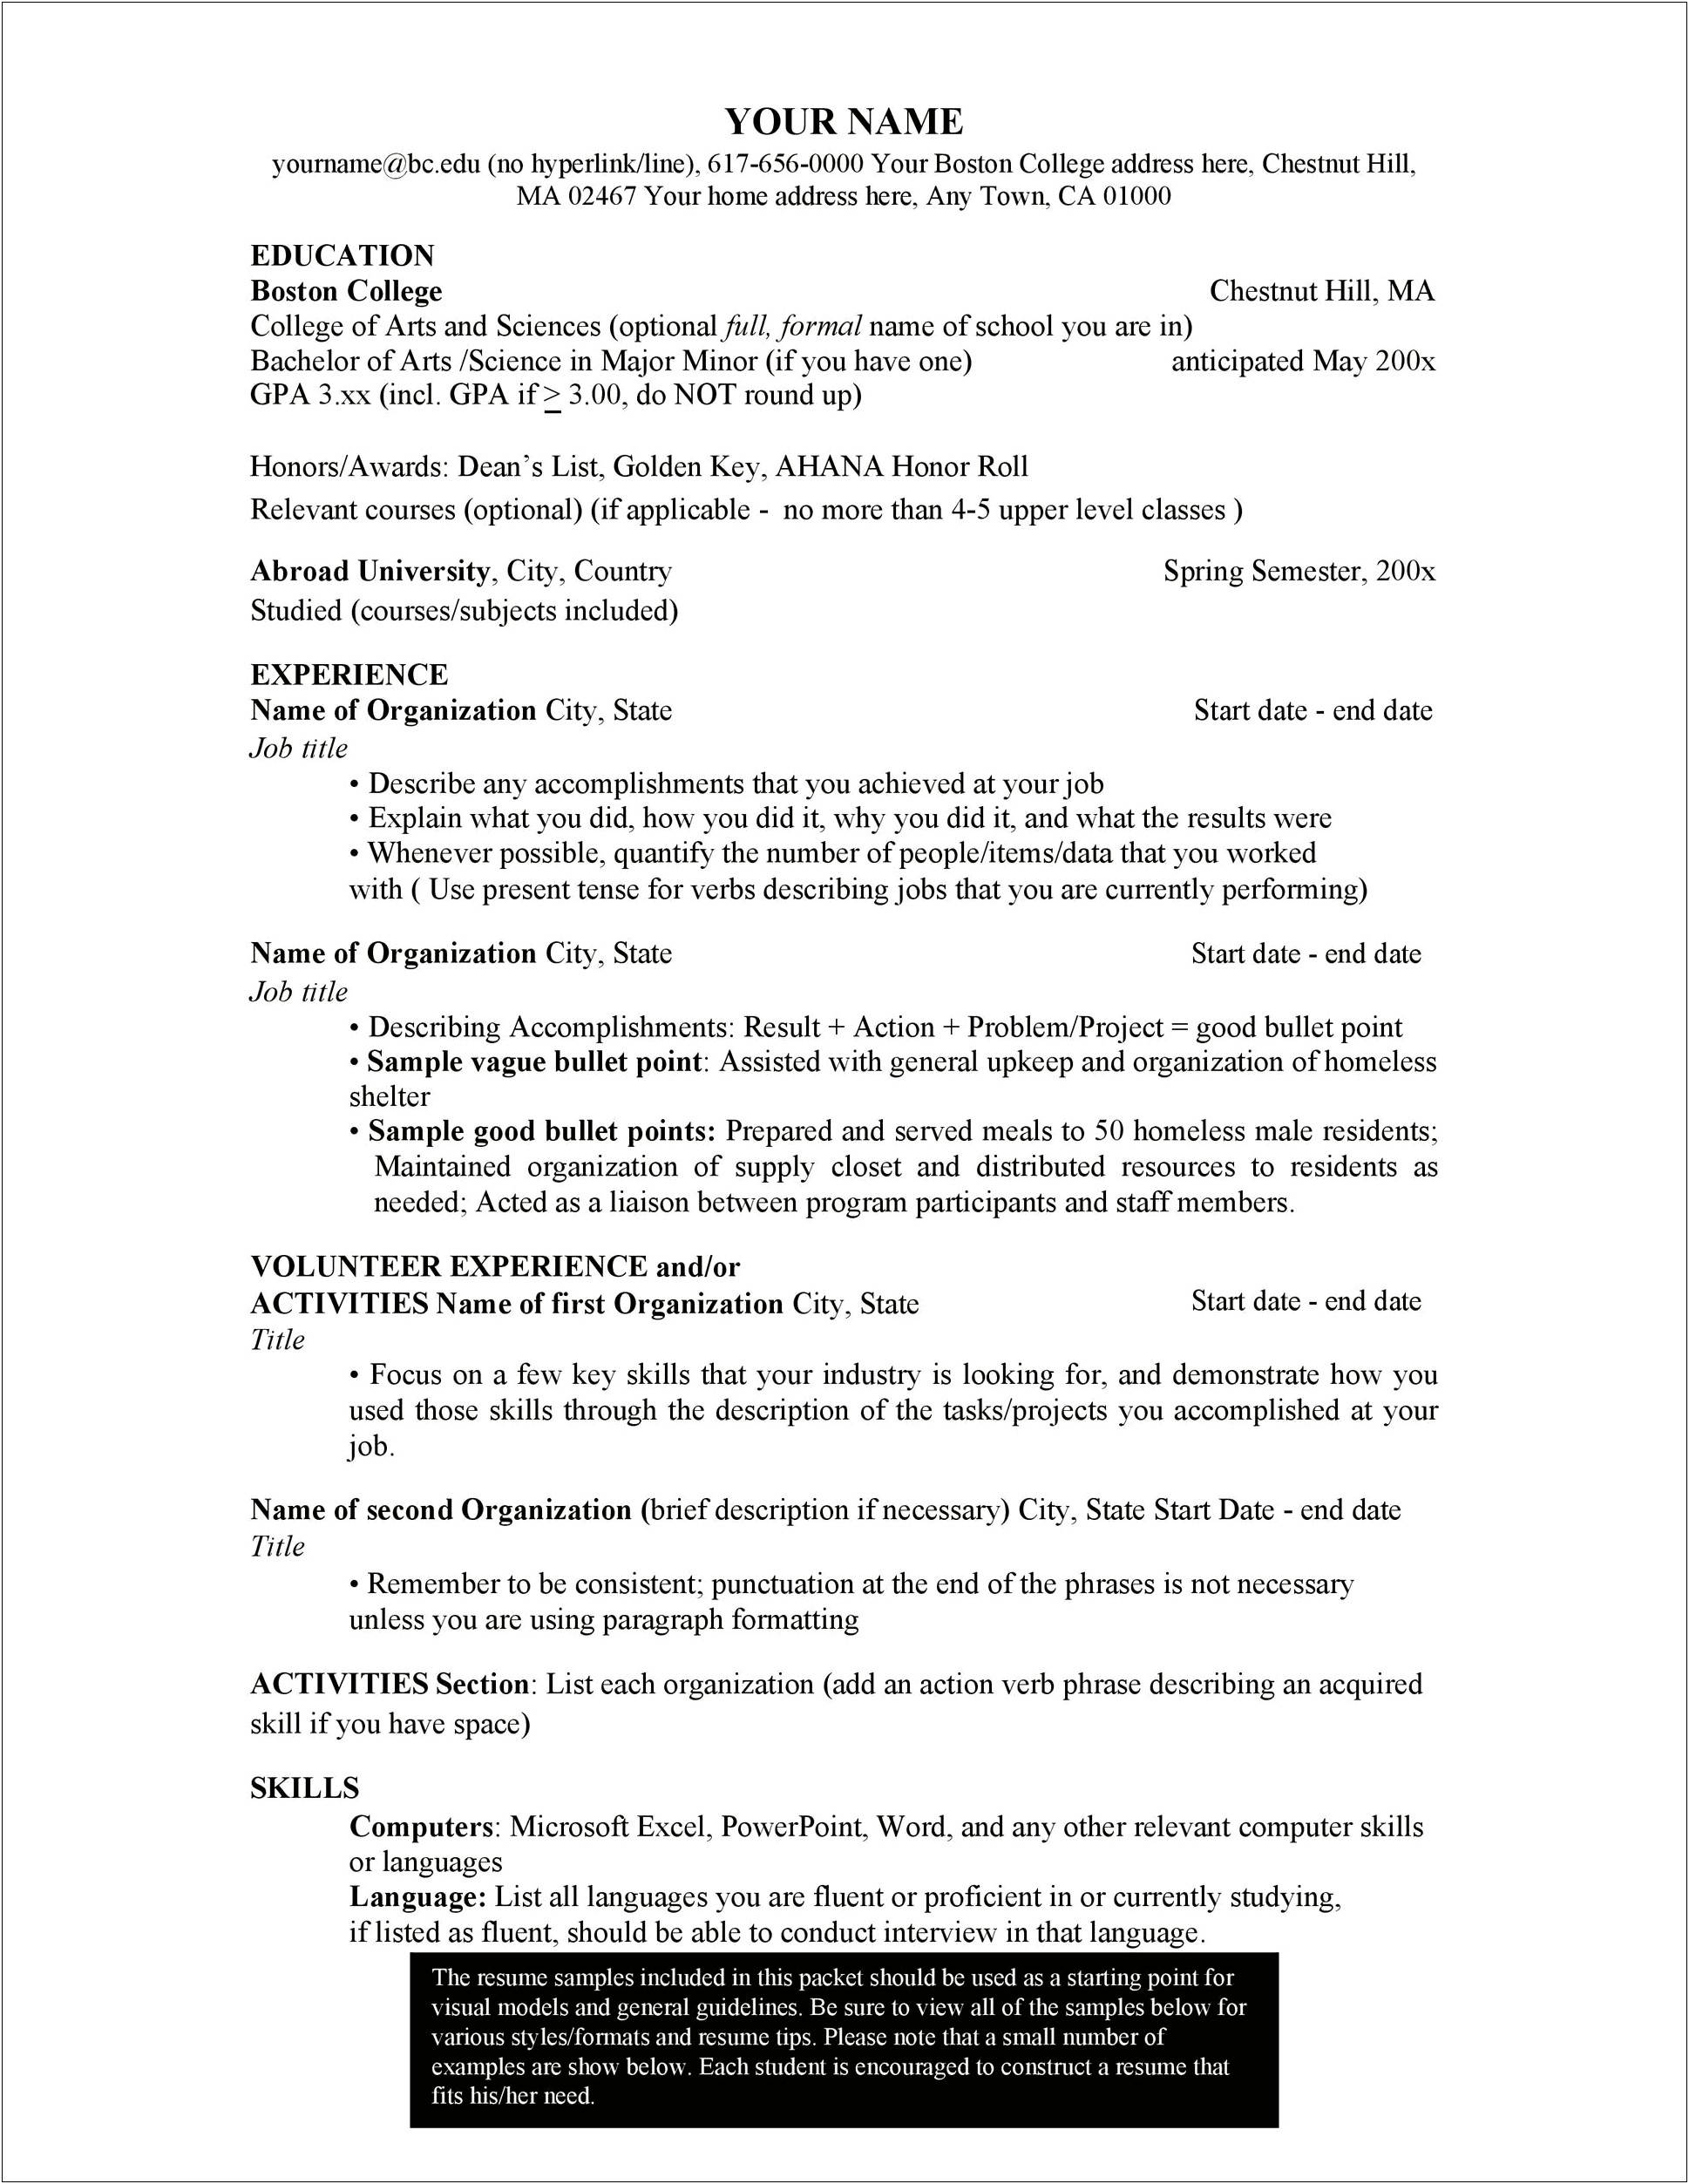 Things That Look Good On Your College Resume